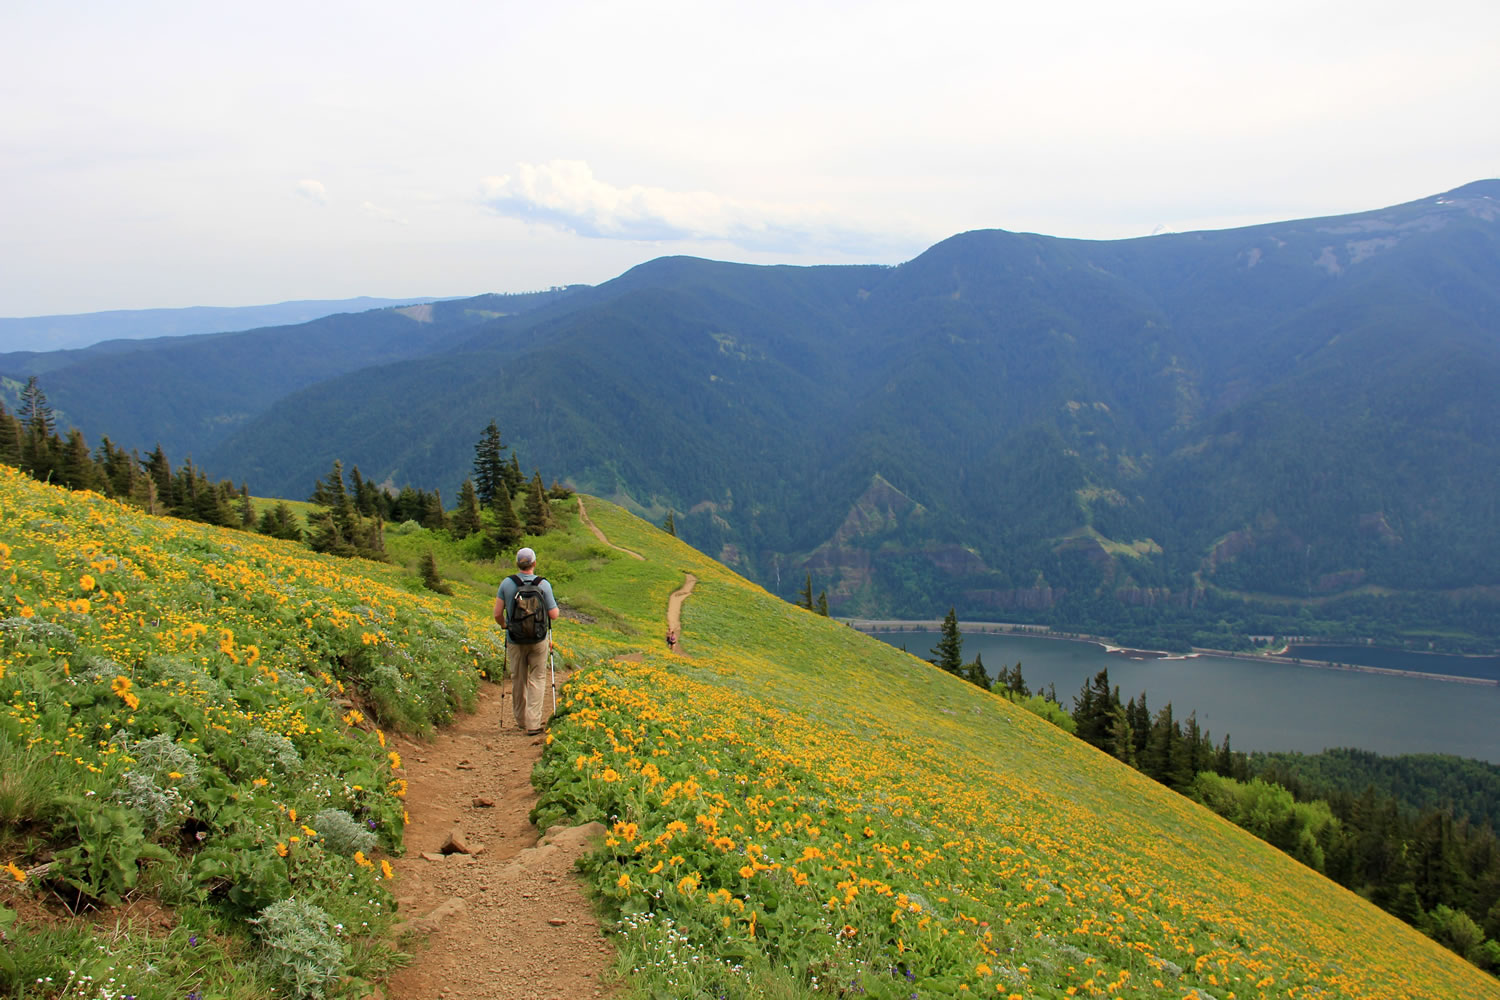 A person walks May 15 on a trail through the upper meadows of Dog Mountain on the Washington side of the Columbia River Gorge near Stevenson. The mountain is carpeted spectacularly with yellow balsamroot during May and early June.